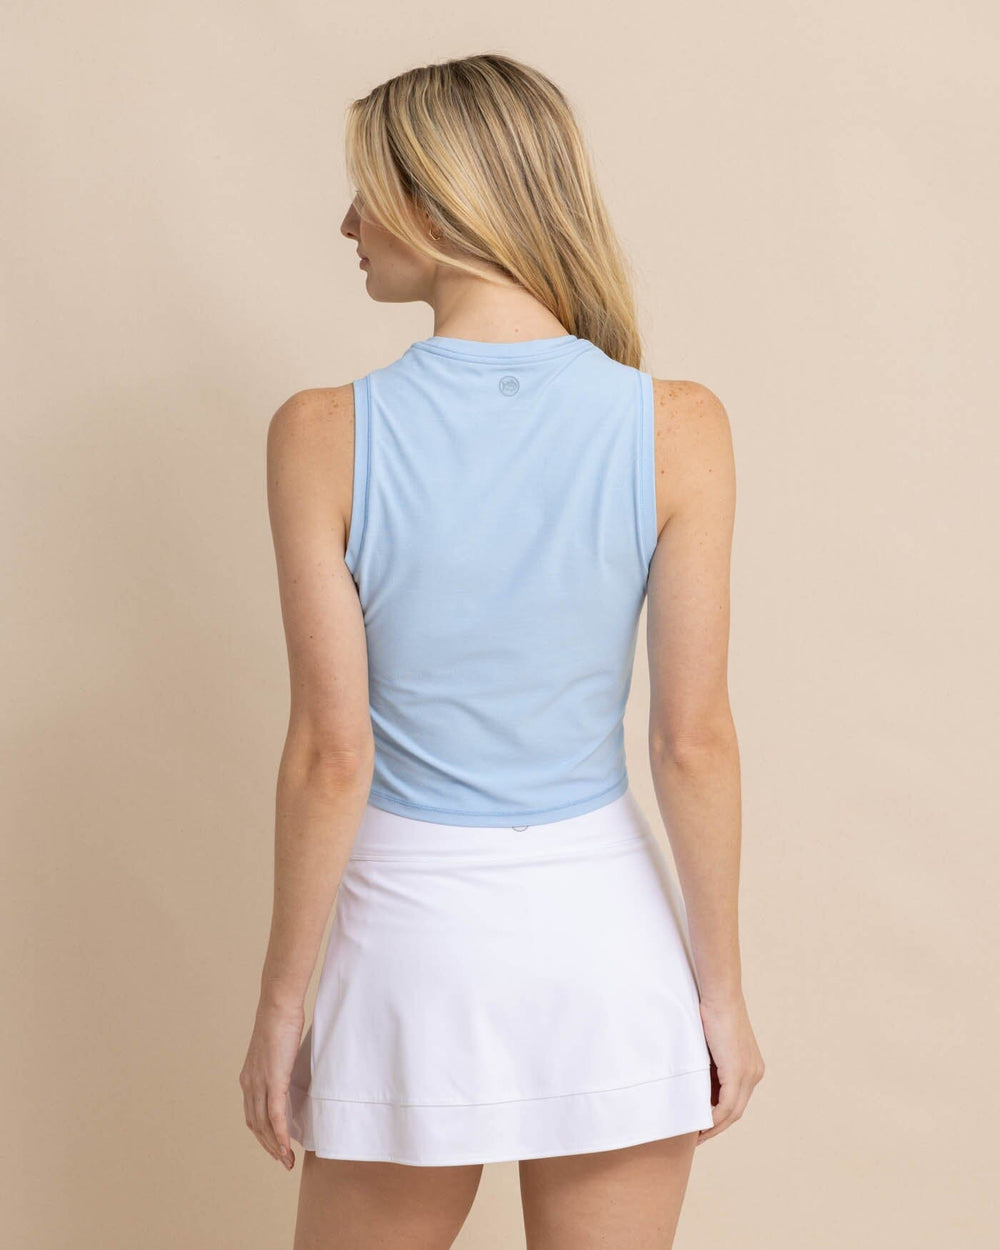 The back view of the Southern Tide Lacy Brrr-illiant Twist Top by Southern Tide - Clearwater Blue